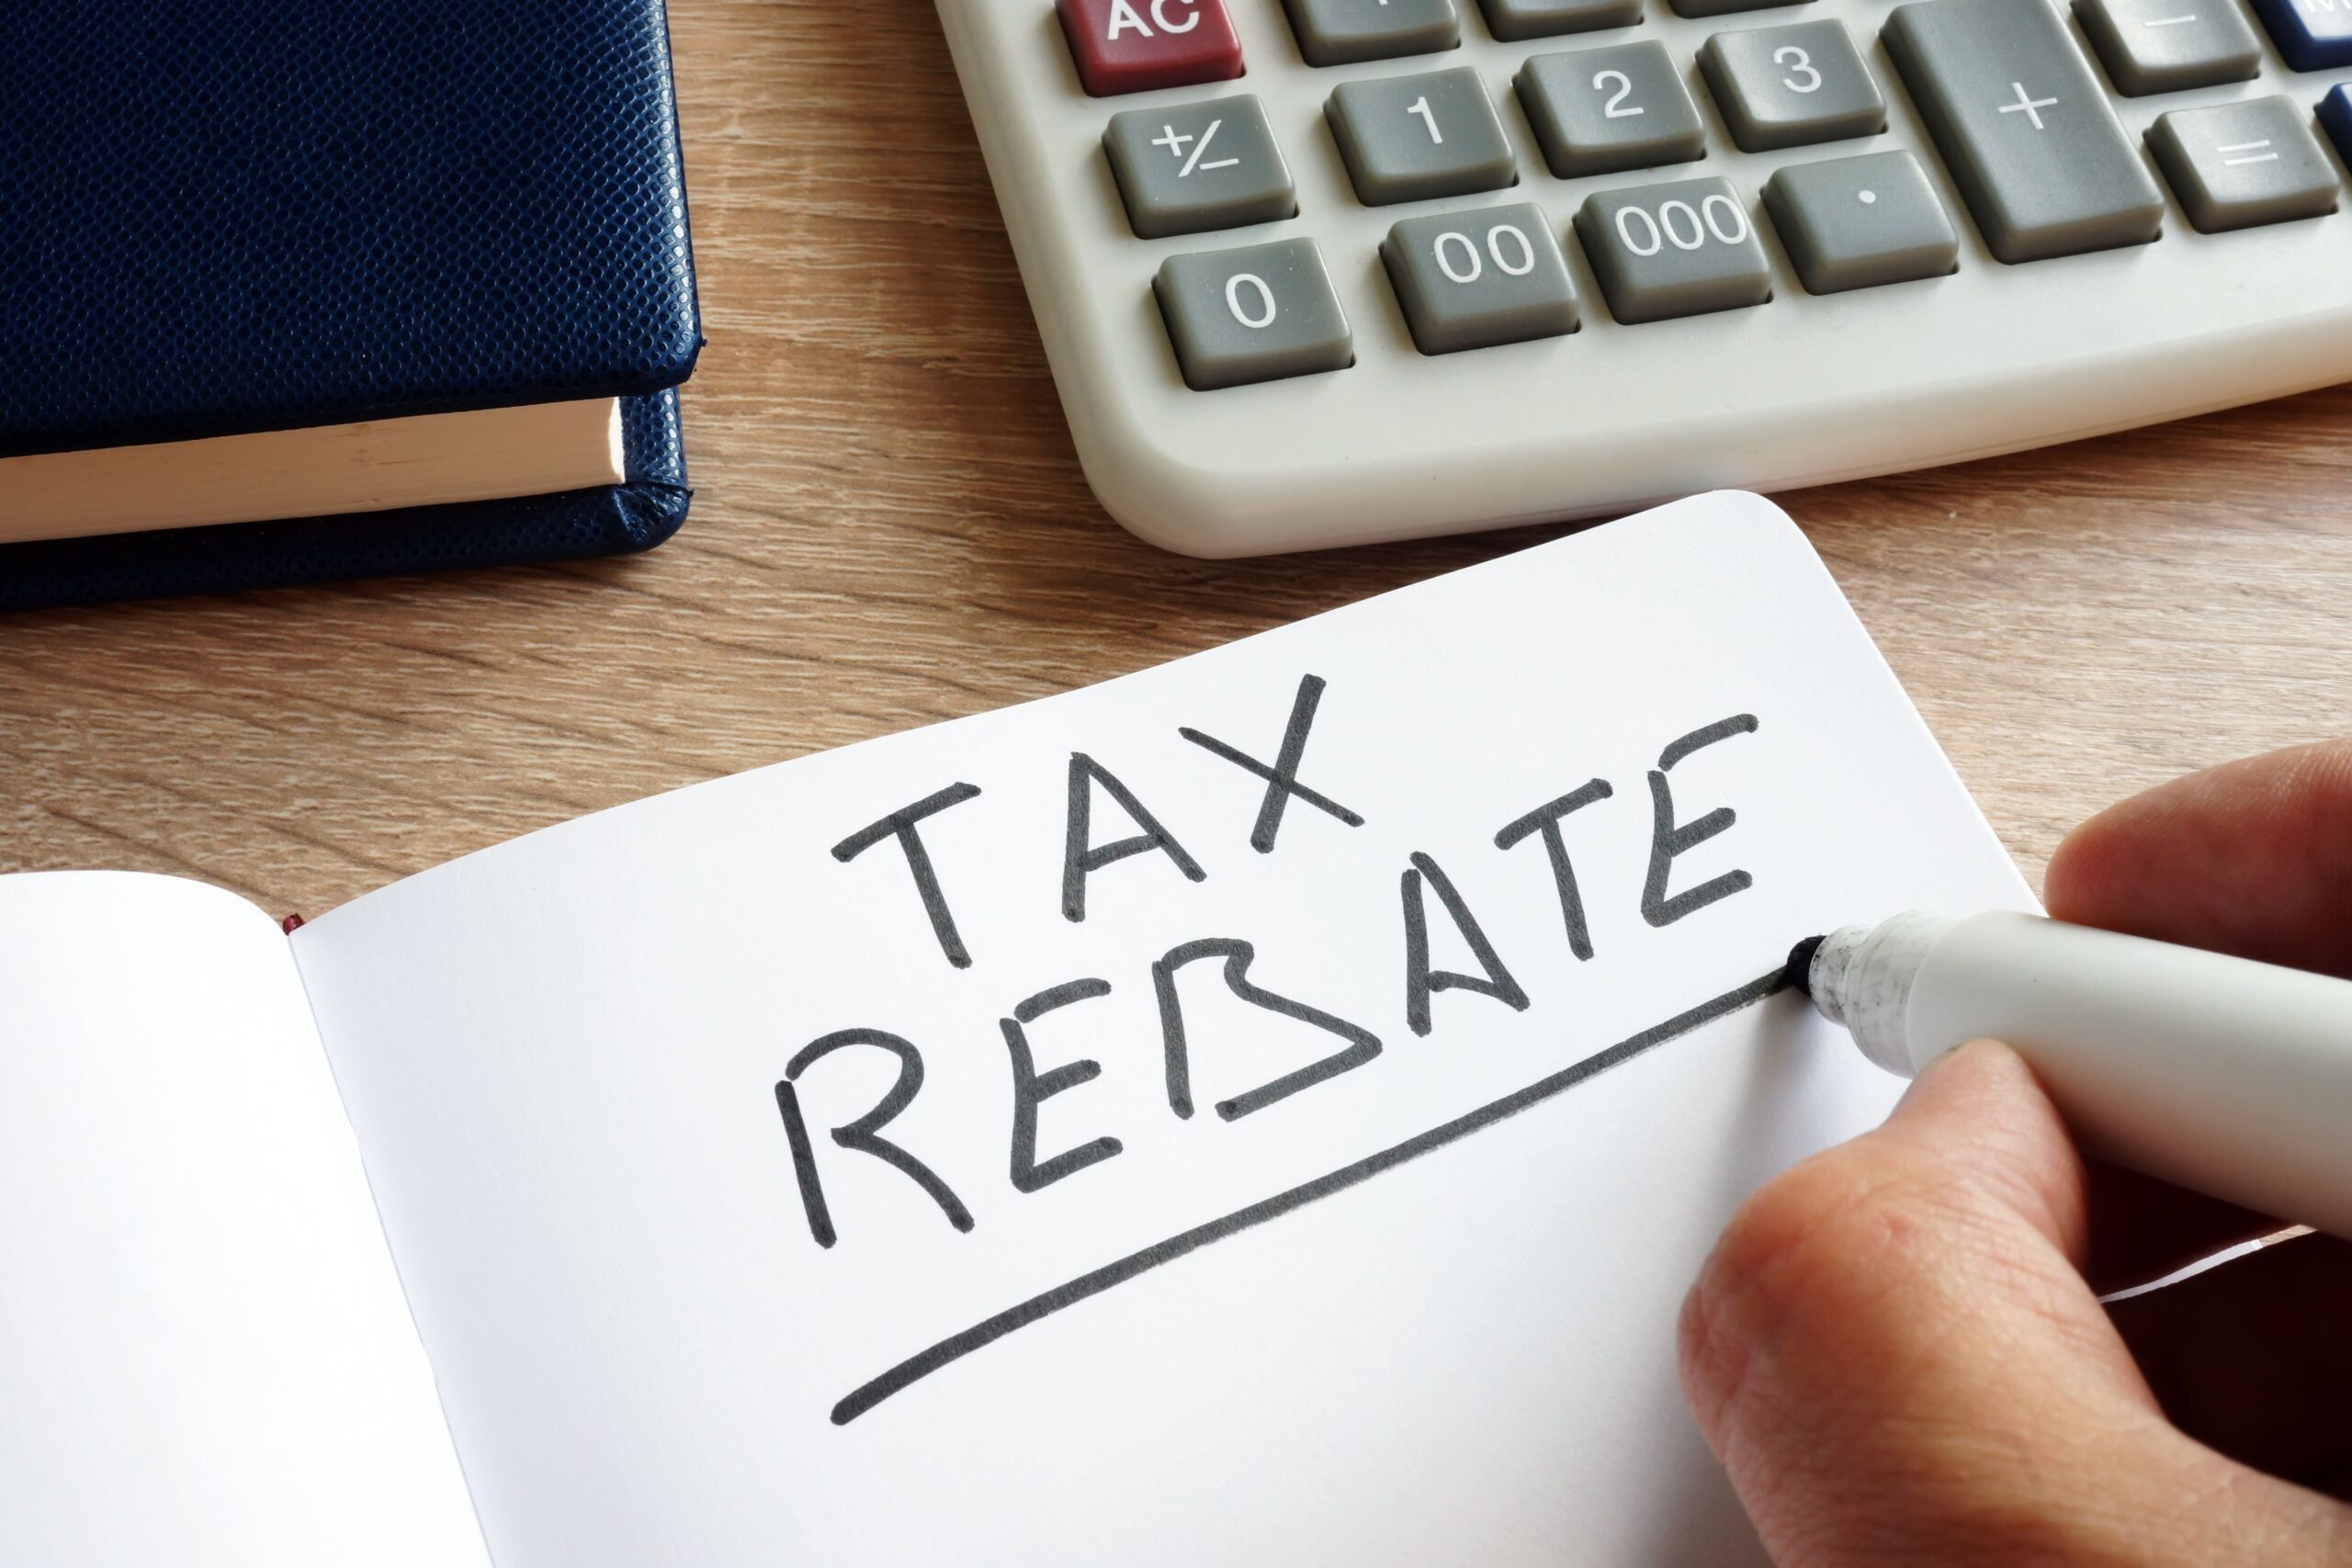 What Are the Best Ways to Manage Tax Rebates?